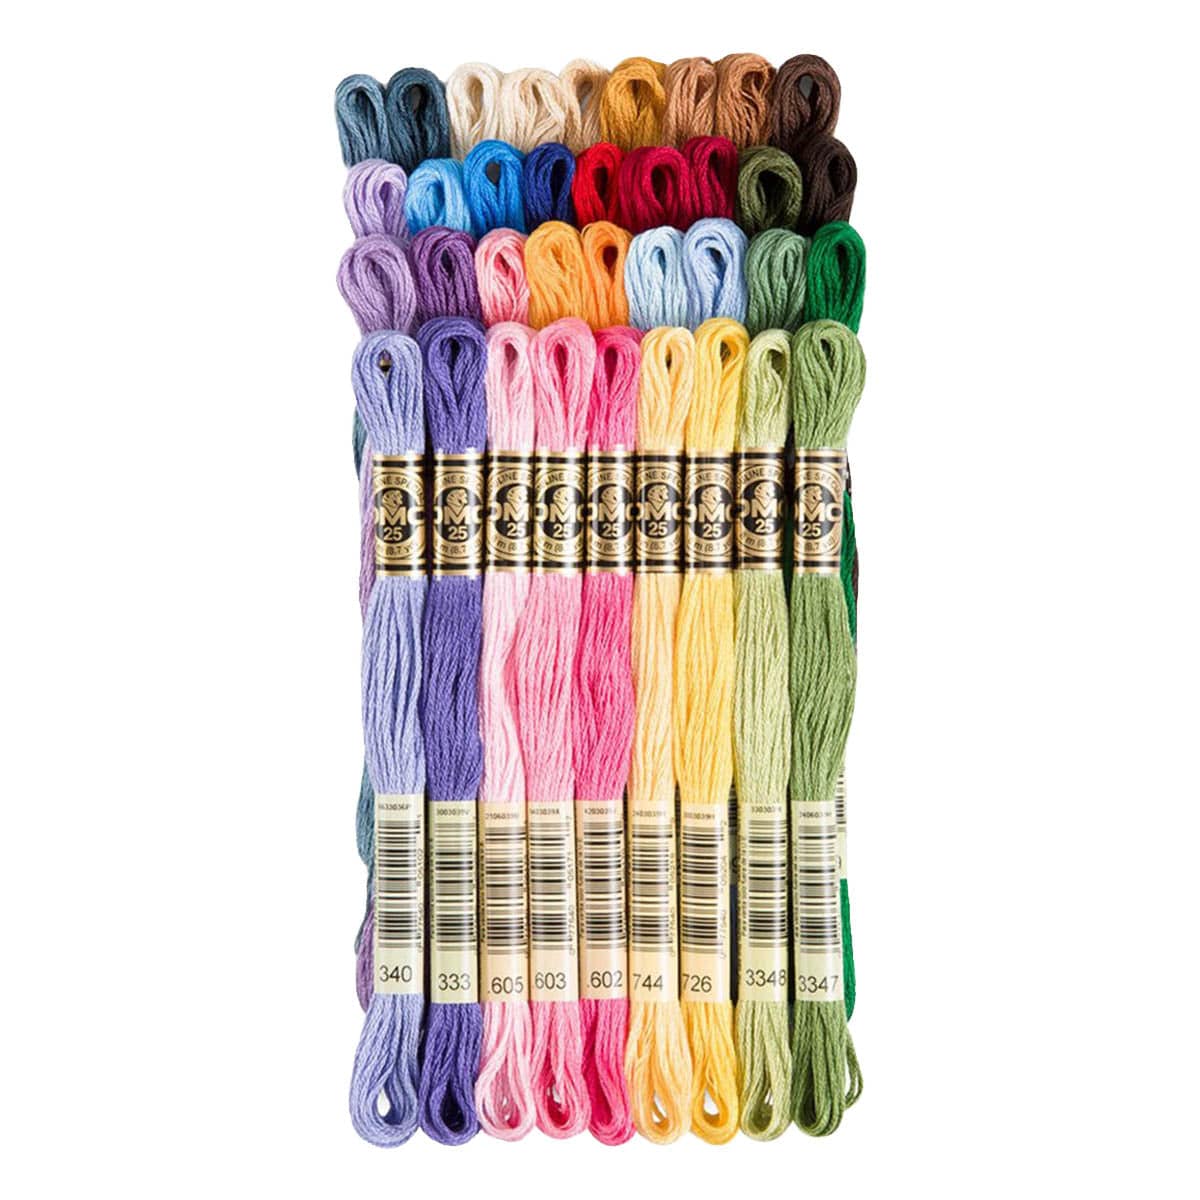 DMC Variegated Embroidery Floss 24 Newer Color Collection 